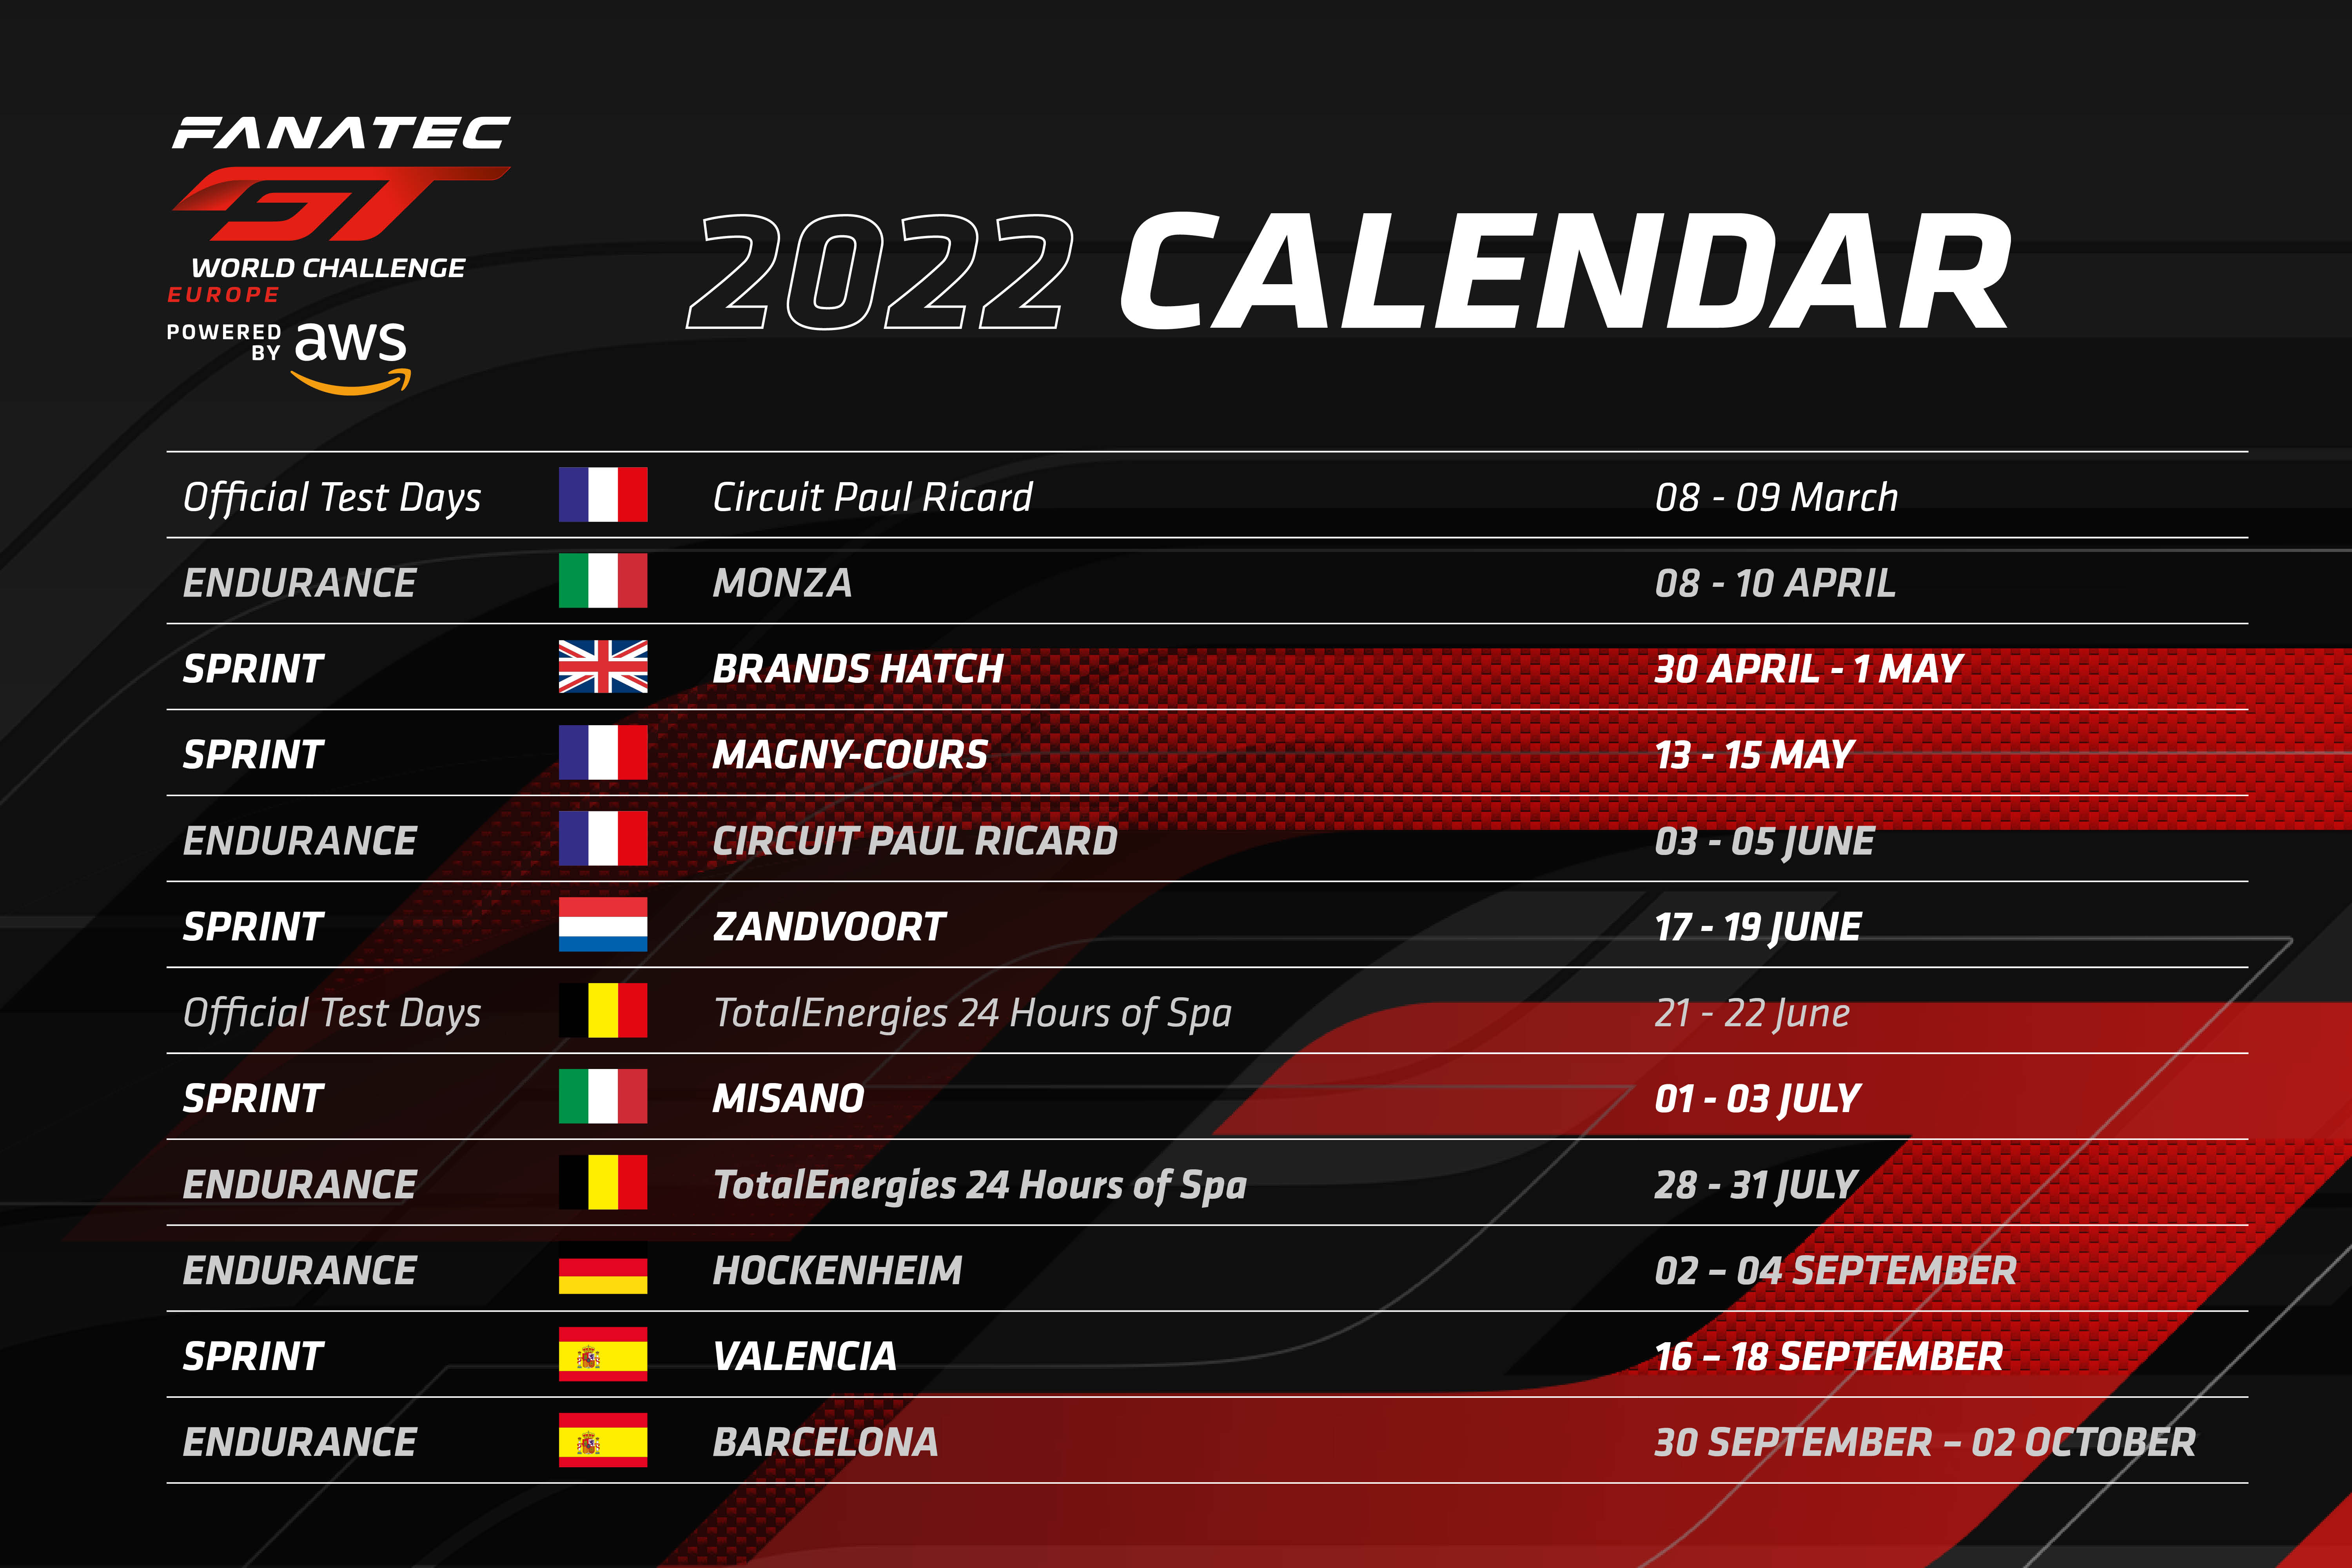 Esports Calendar 2022 European And American Series Among First Set Of 2022 Calendars Confirmed By  Sro Motorsports Group | Fanatec Gt World Challenge Europe Powered By Aws